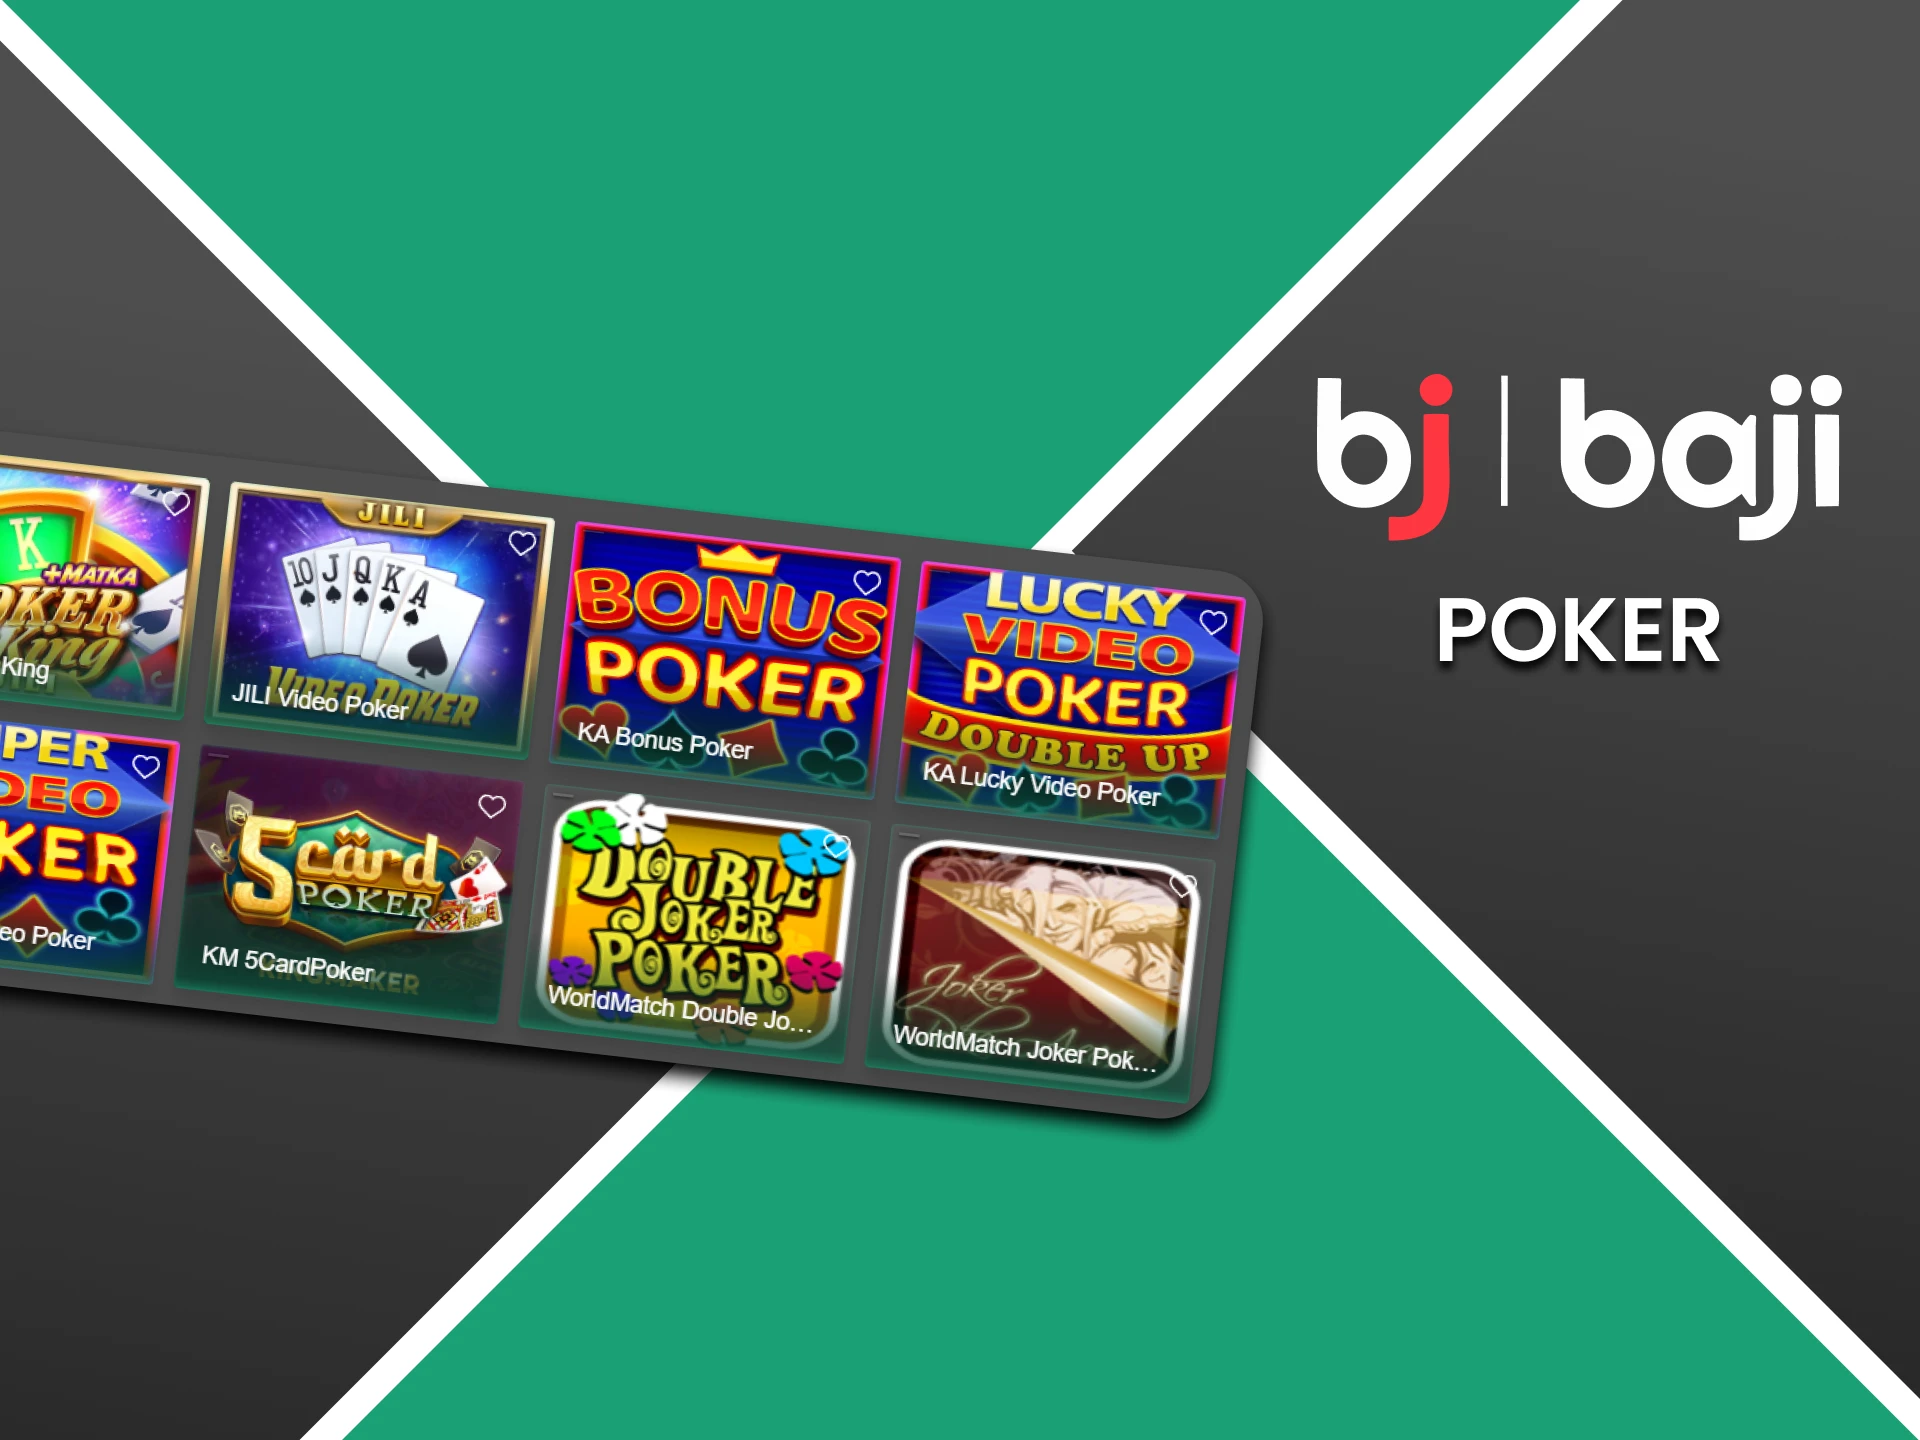 Choose Poker in the table games section from Baji.